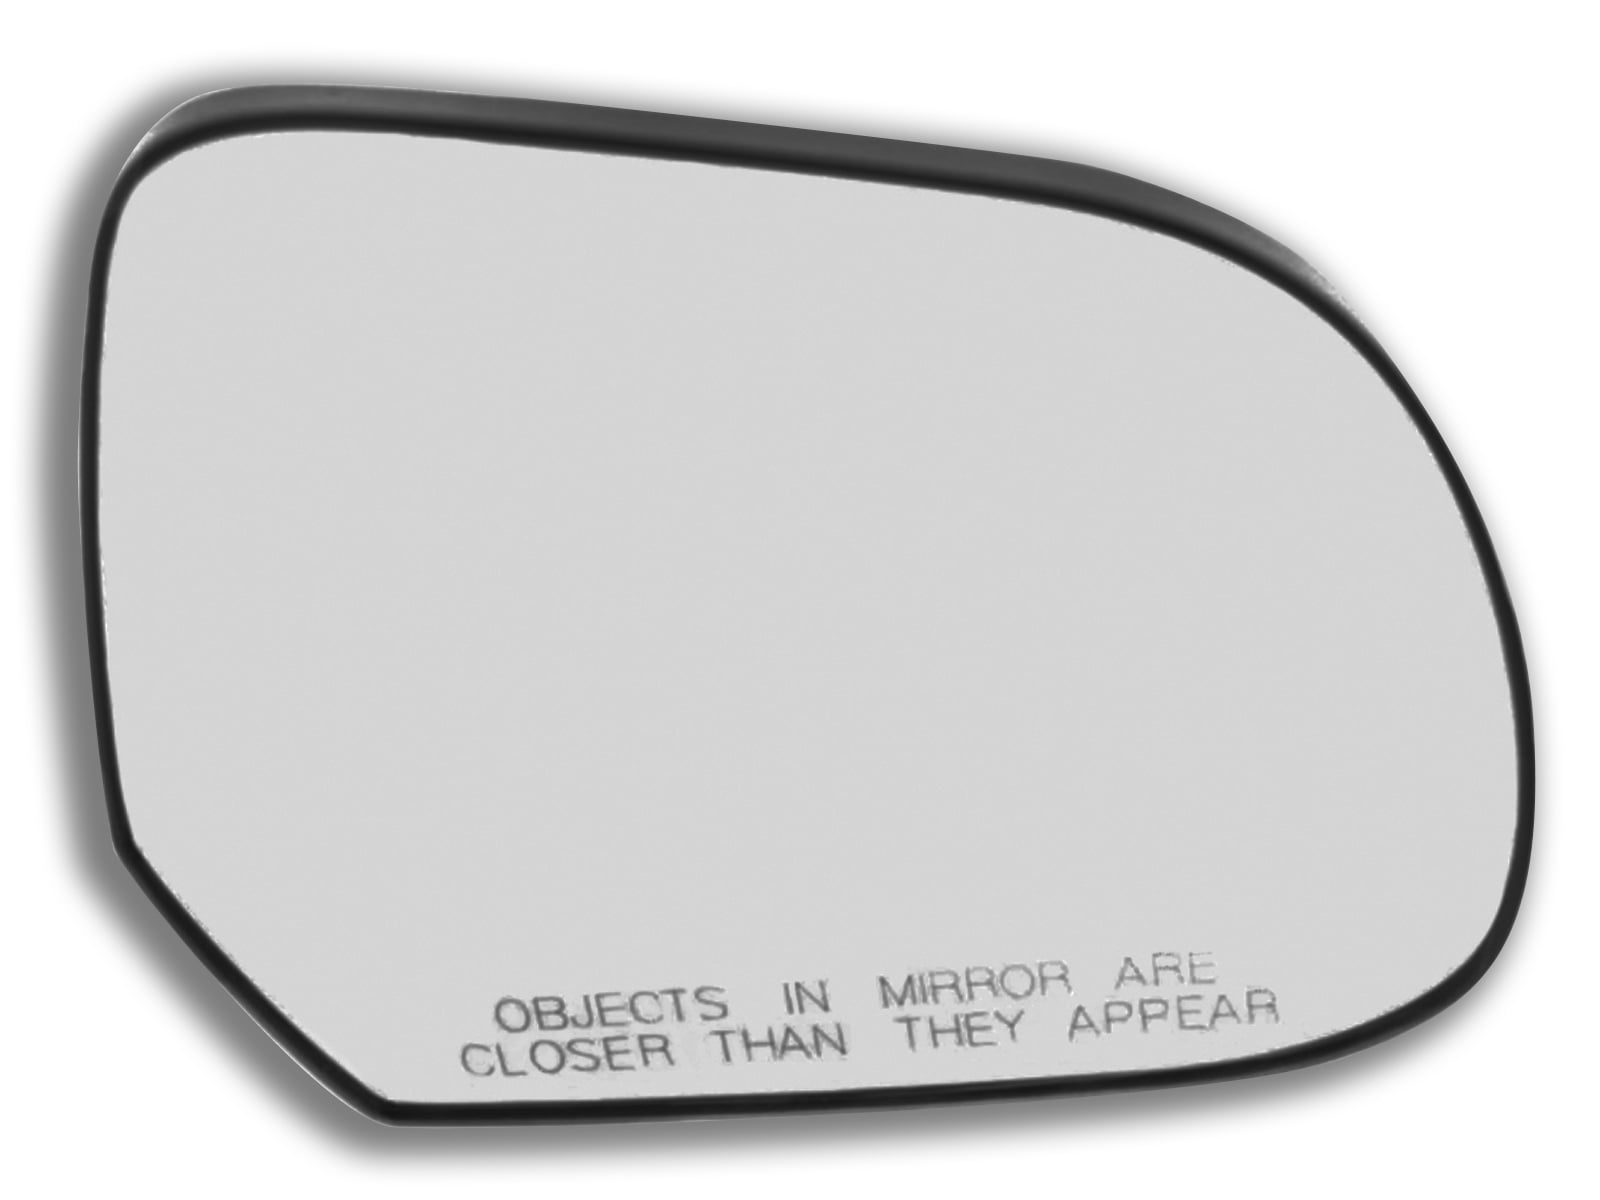 Details about  / NEW RIGHT SIDE POWER DOOR MIRROR FITS NISSAN VERSA 2012-2014 963651HK5A